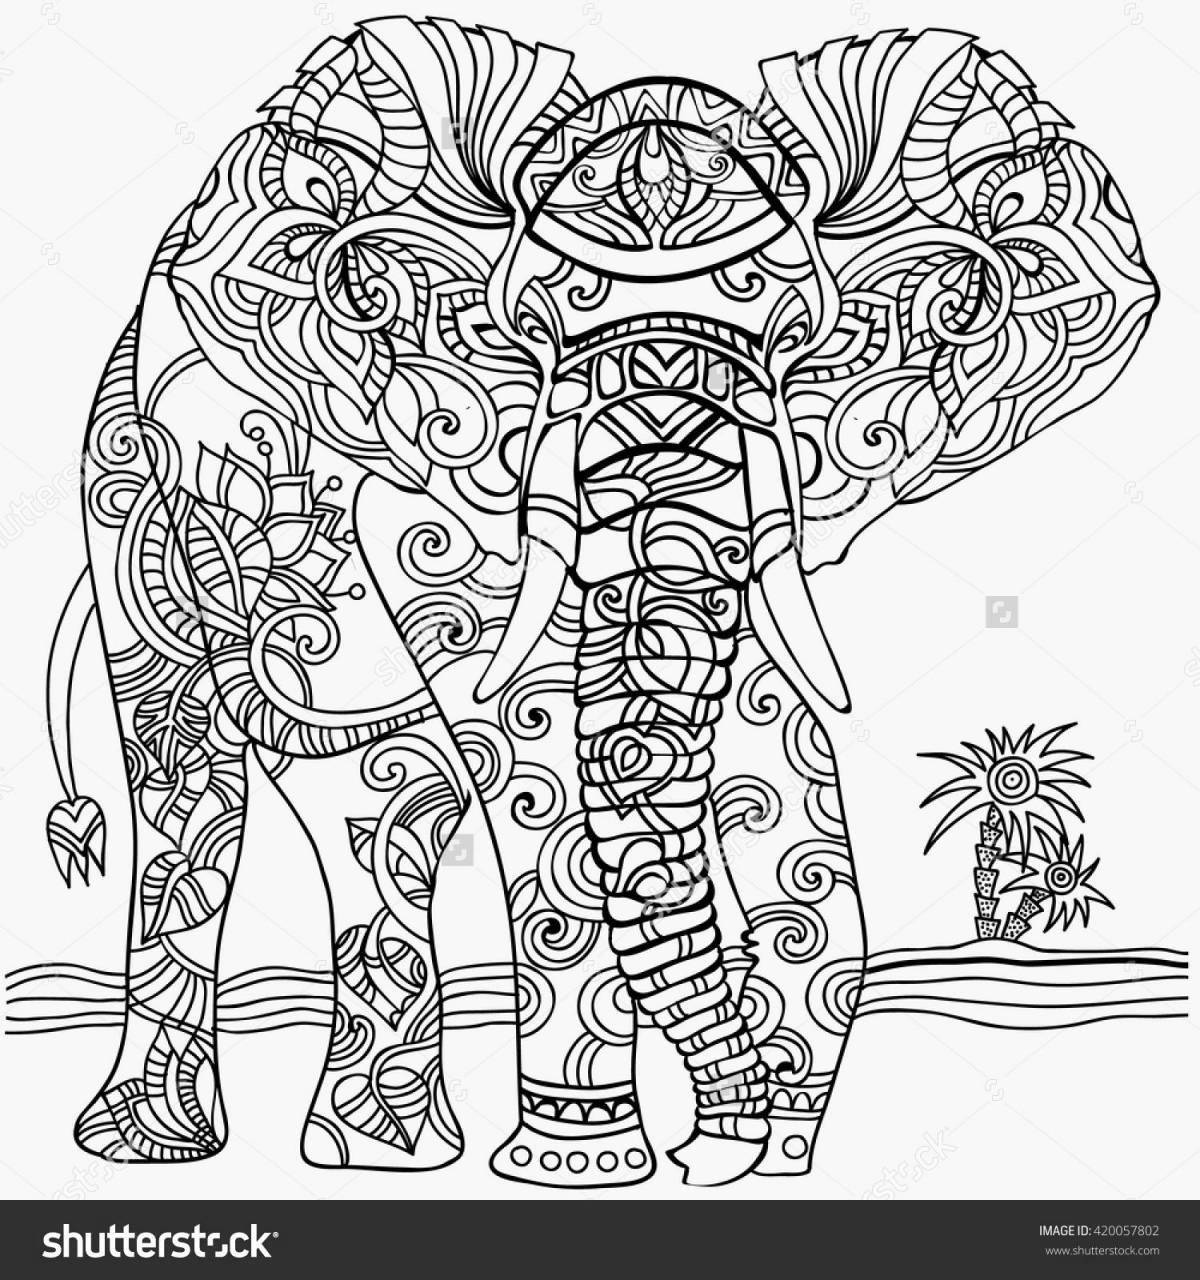 Exquisite elephant coloring by numbers